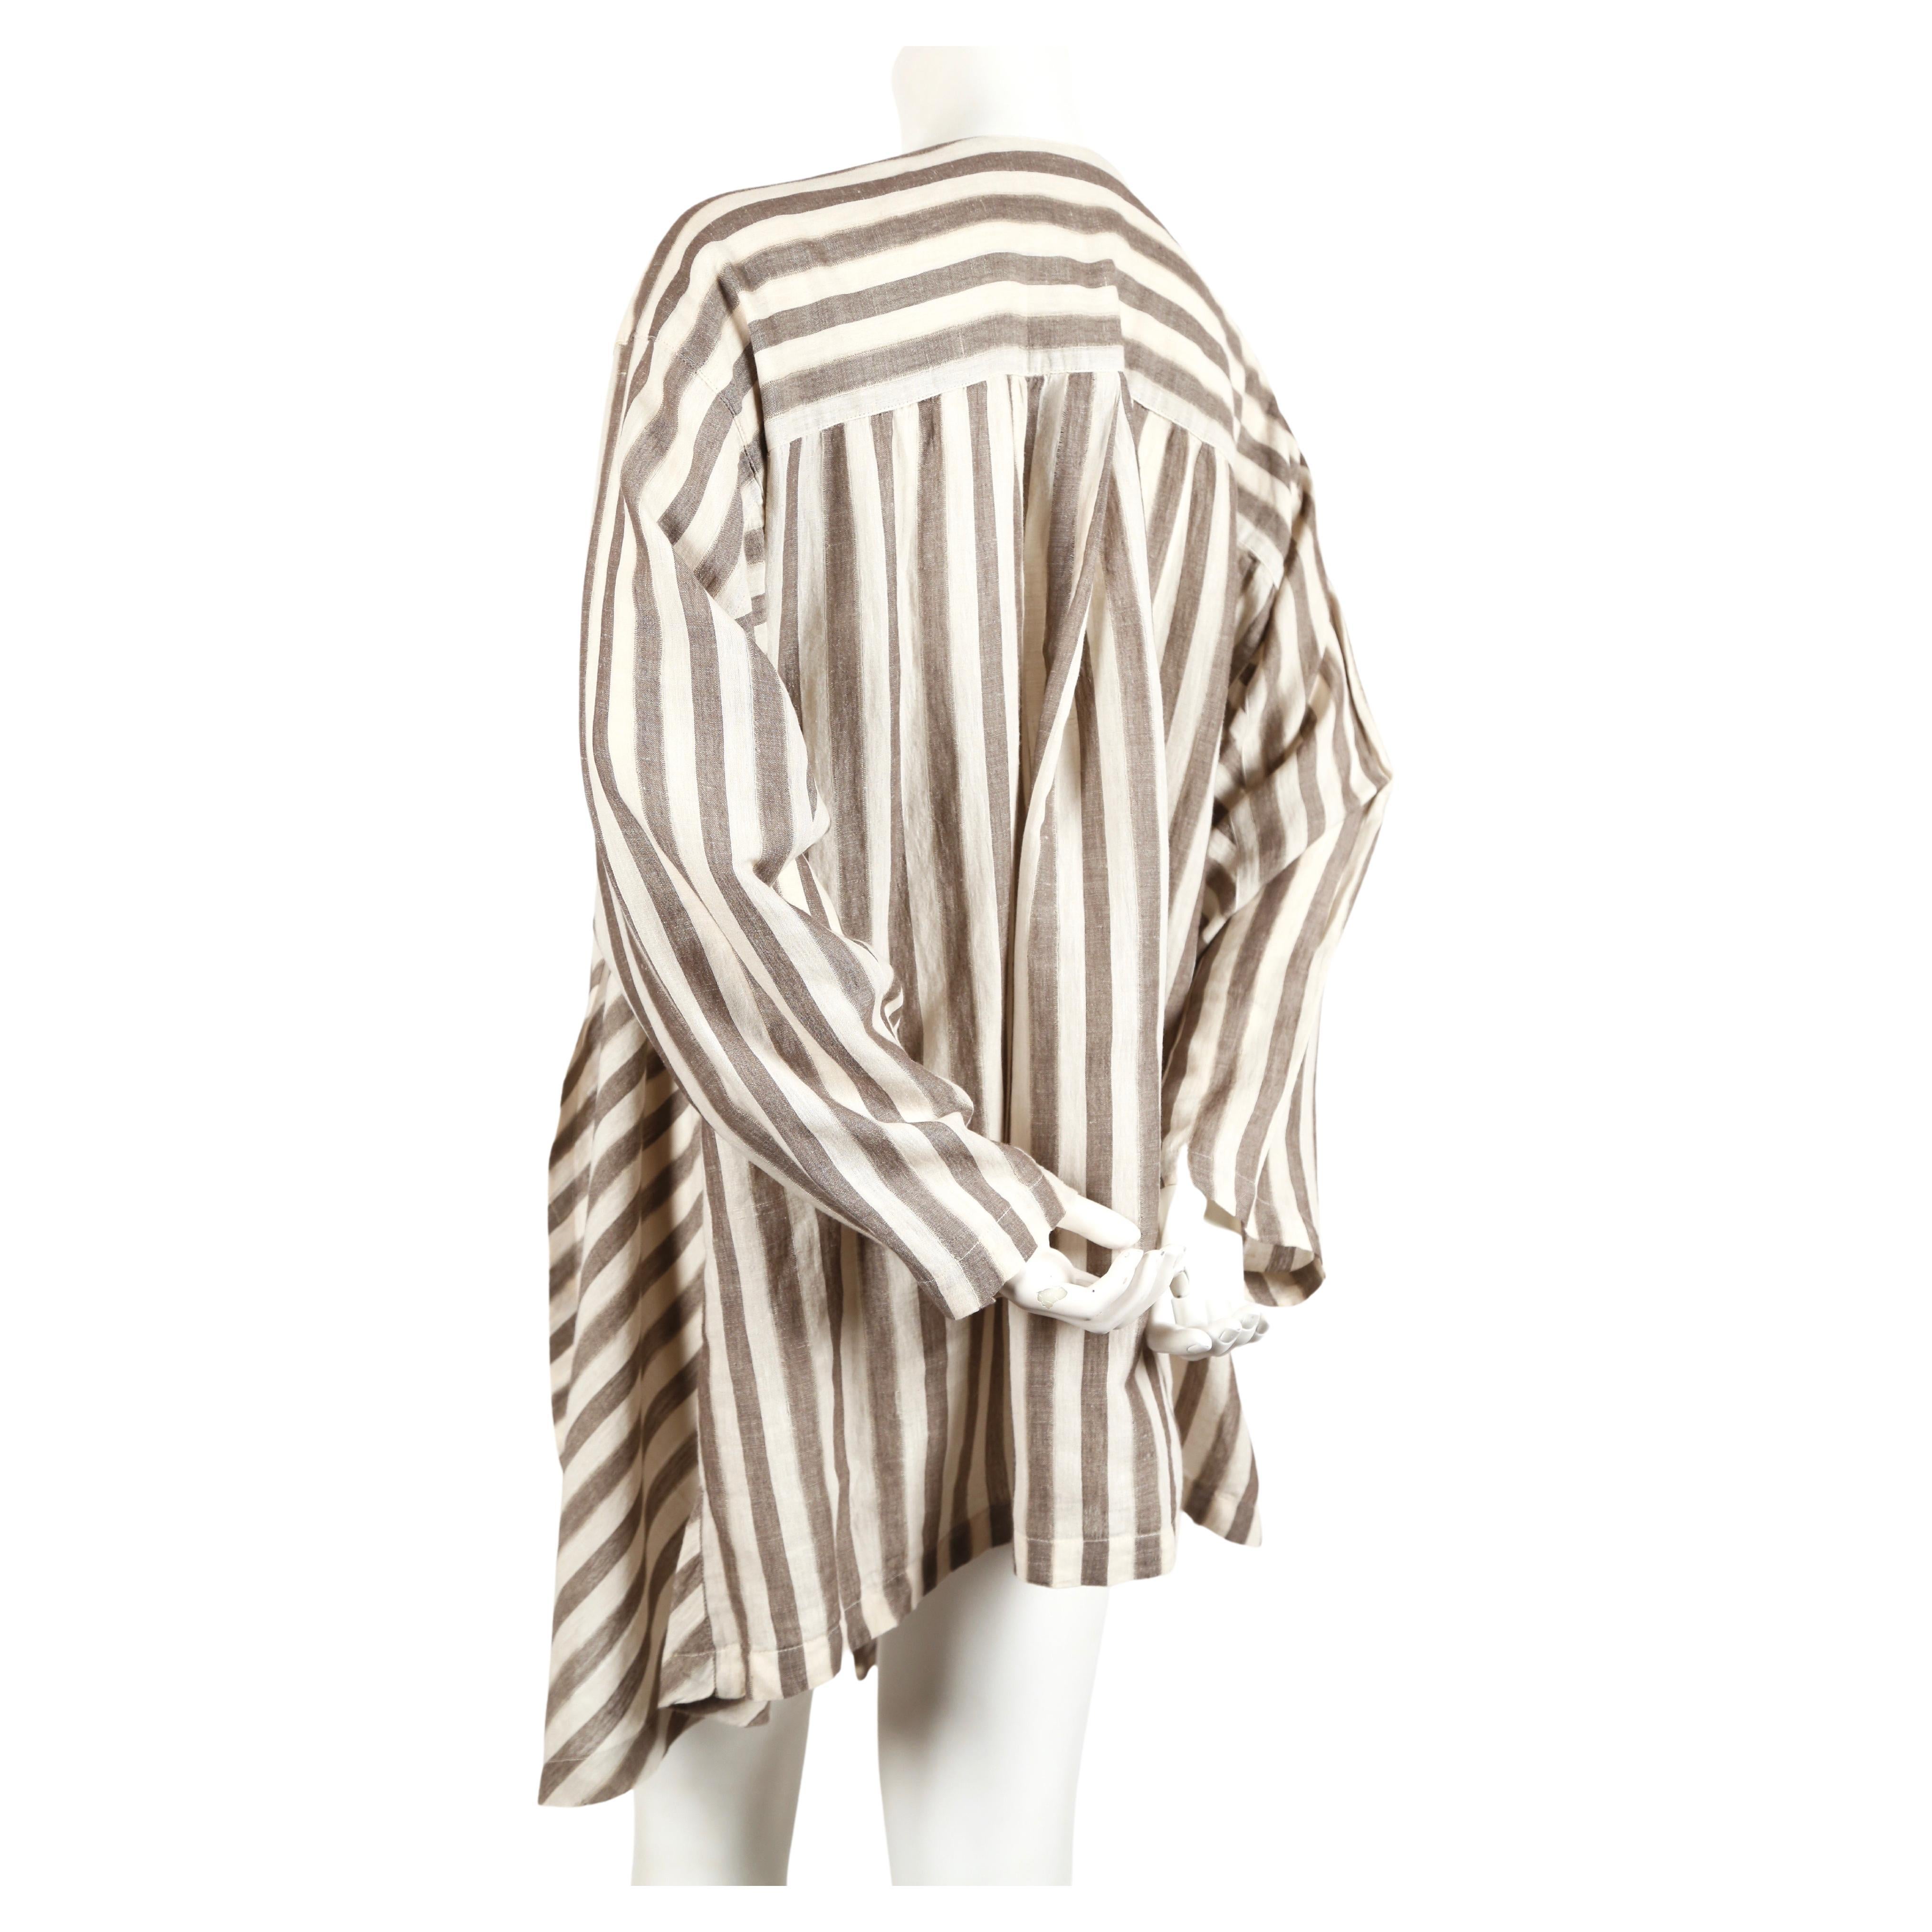 Very lightweight striped cotton jacket with asymmetrical cut designed by Issey Miyake dating to the early 1980's. No size is indicated however this will fit many sizes due to the oversized cut. Open closure. Very good condition. 